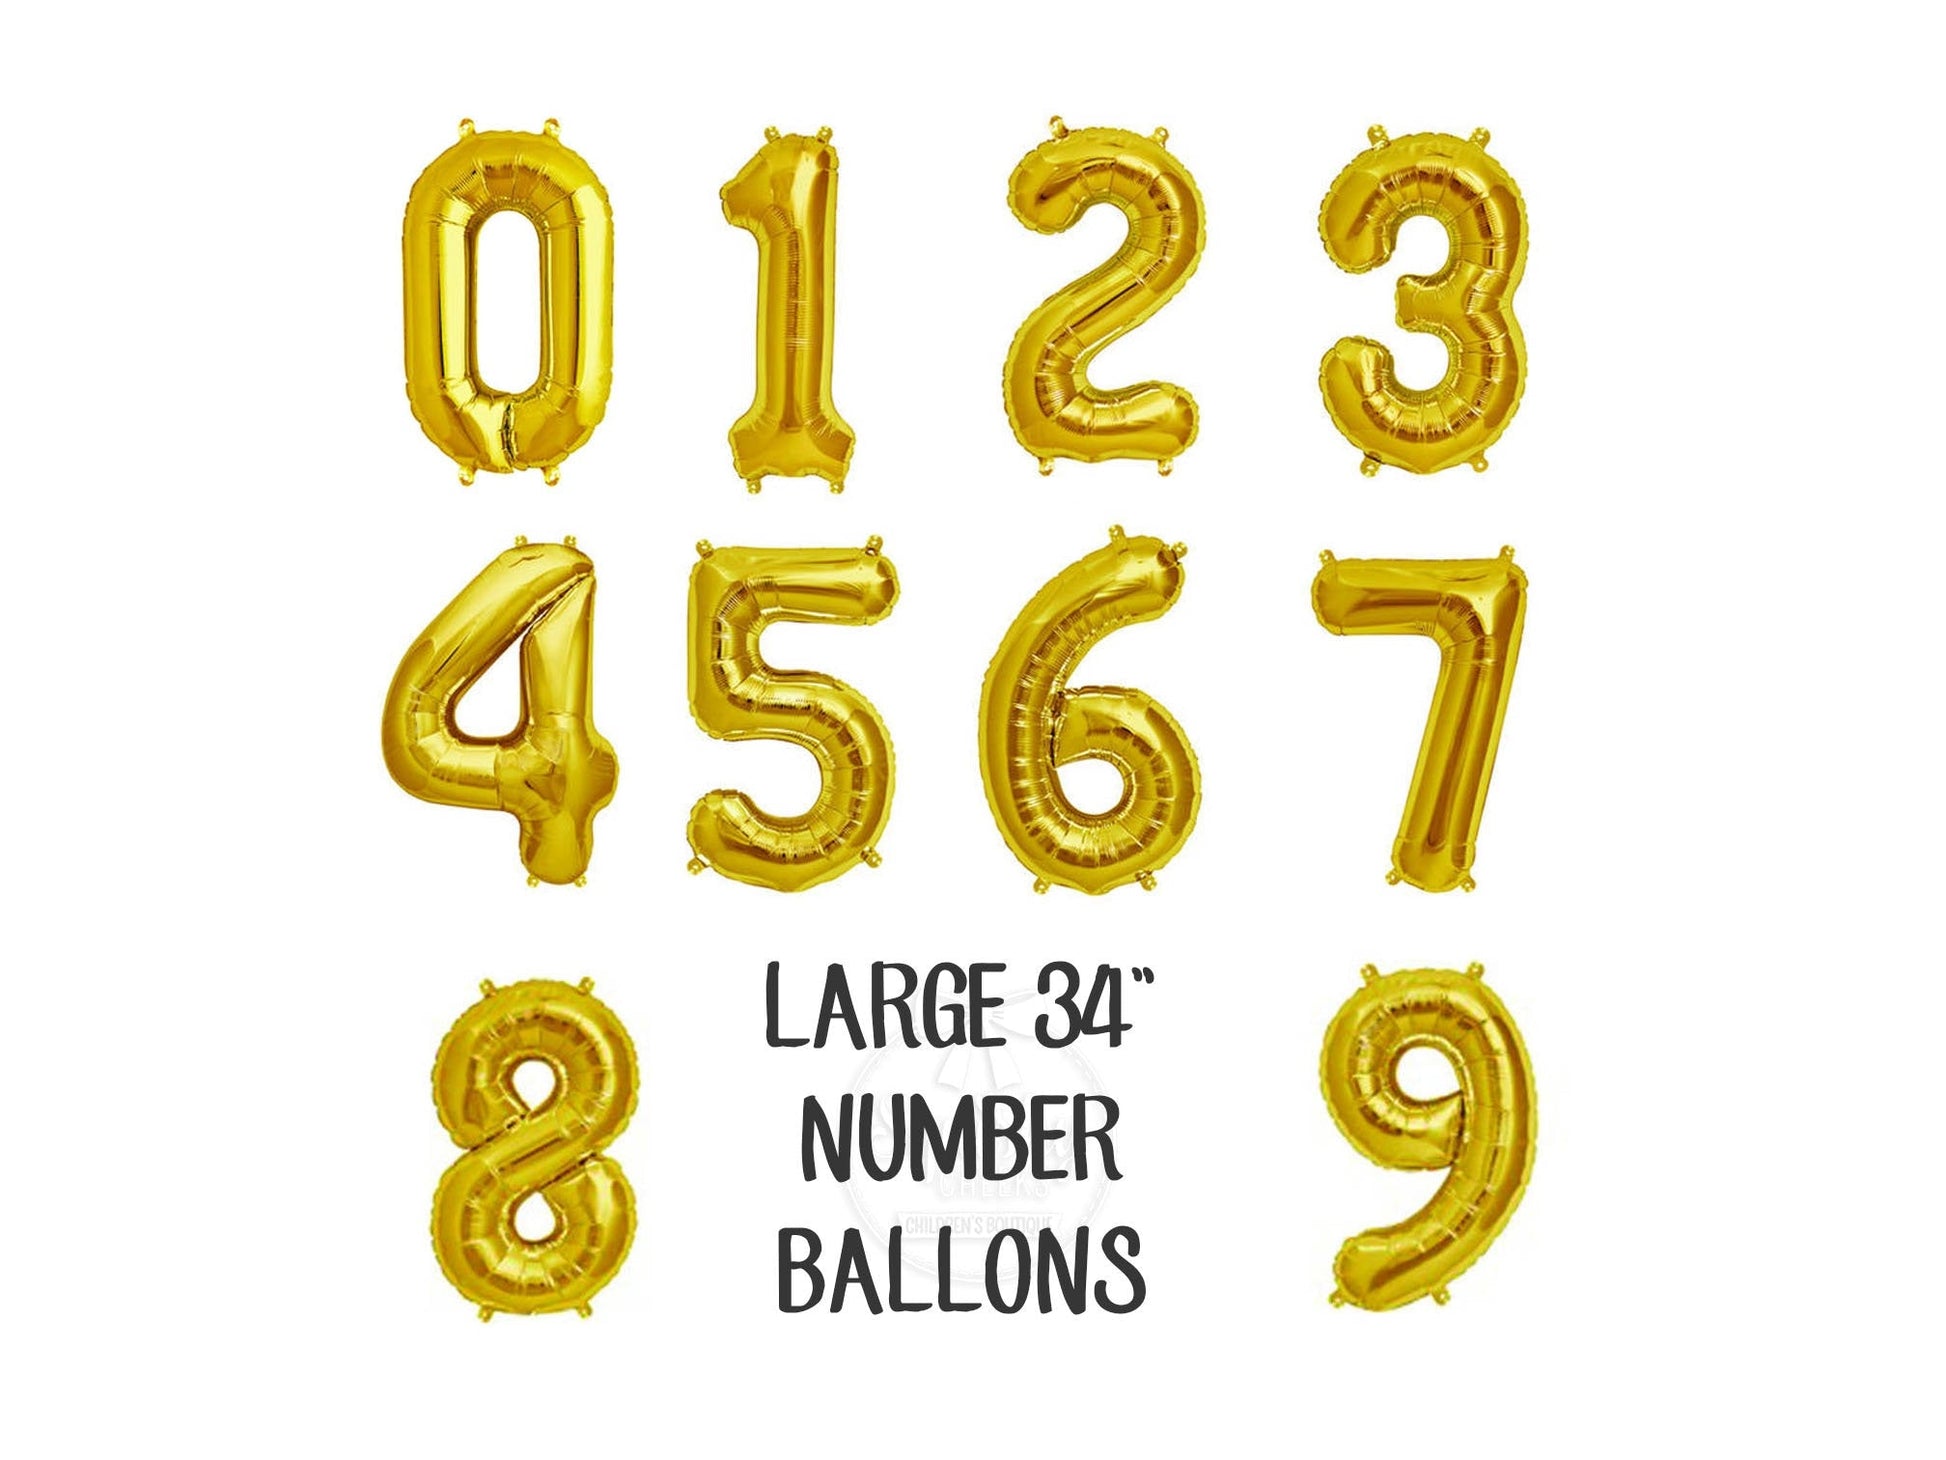 Giant 34" Gold Number Balloon - Squishy Cheeks